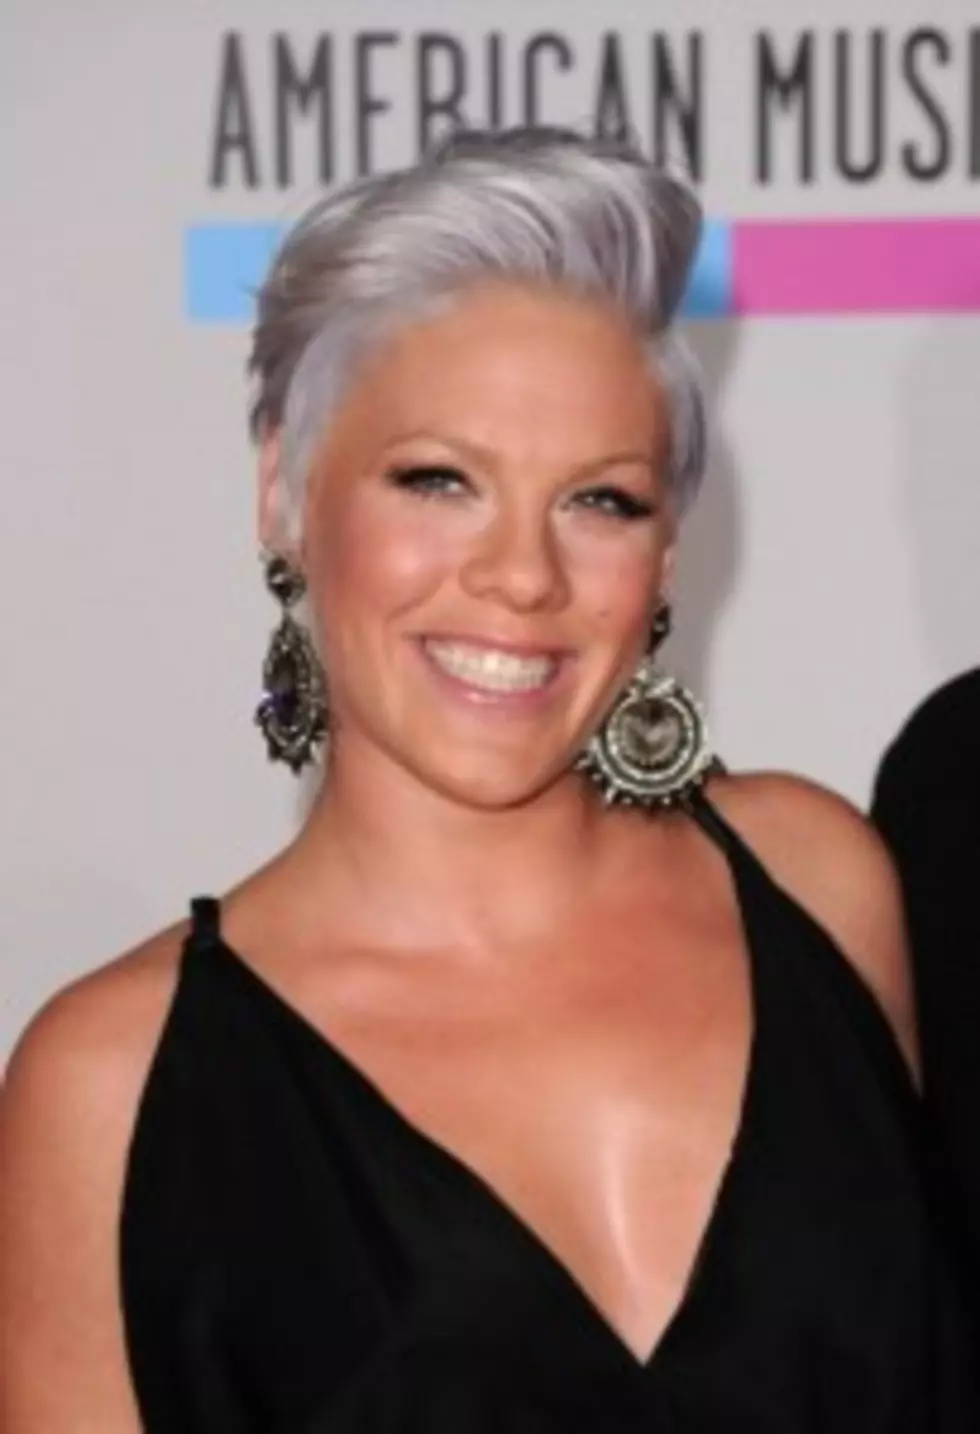 P!NK Returns With New Single and Album On July 9th [Video]